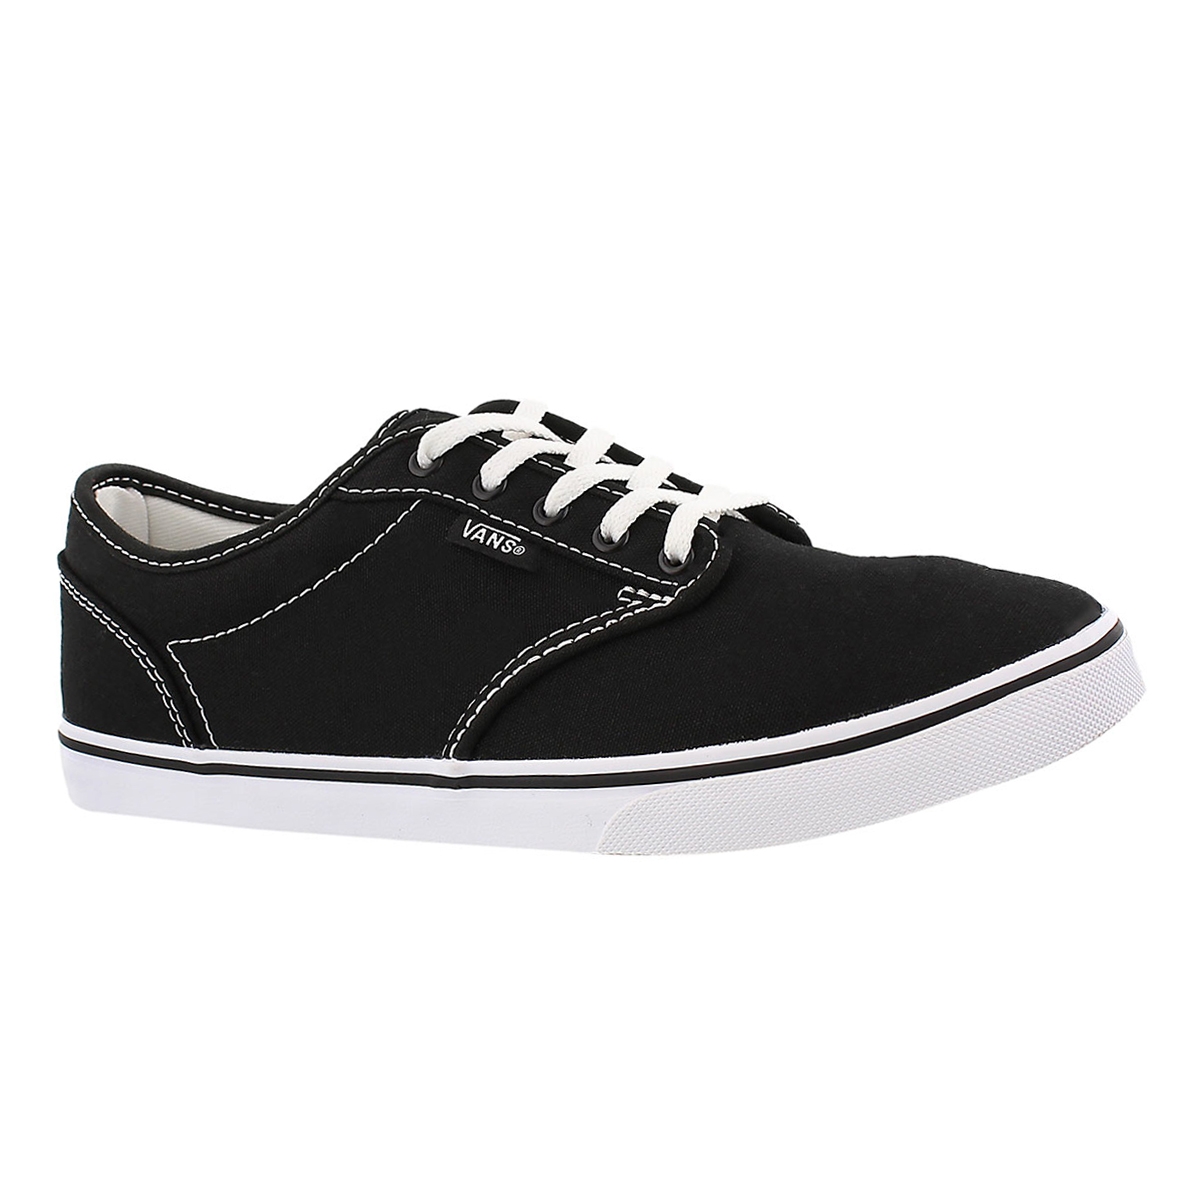 ATWOOD LOW black/white lace up 